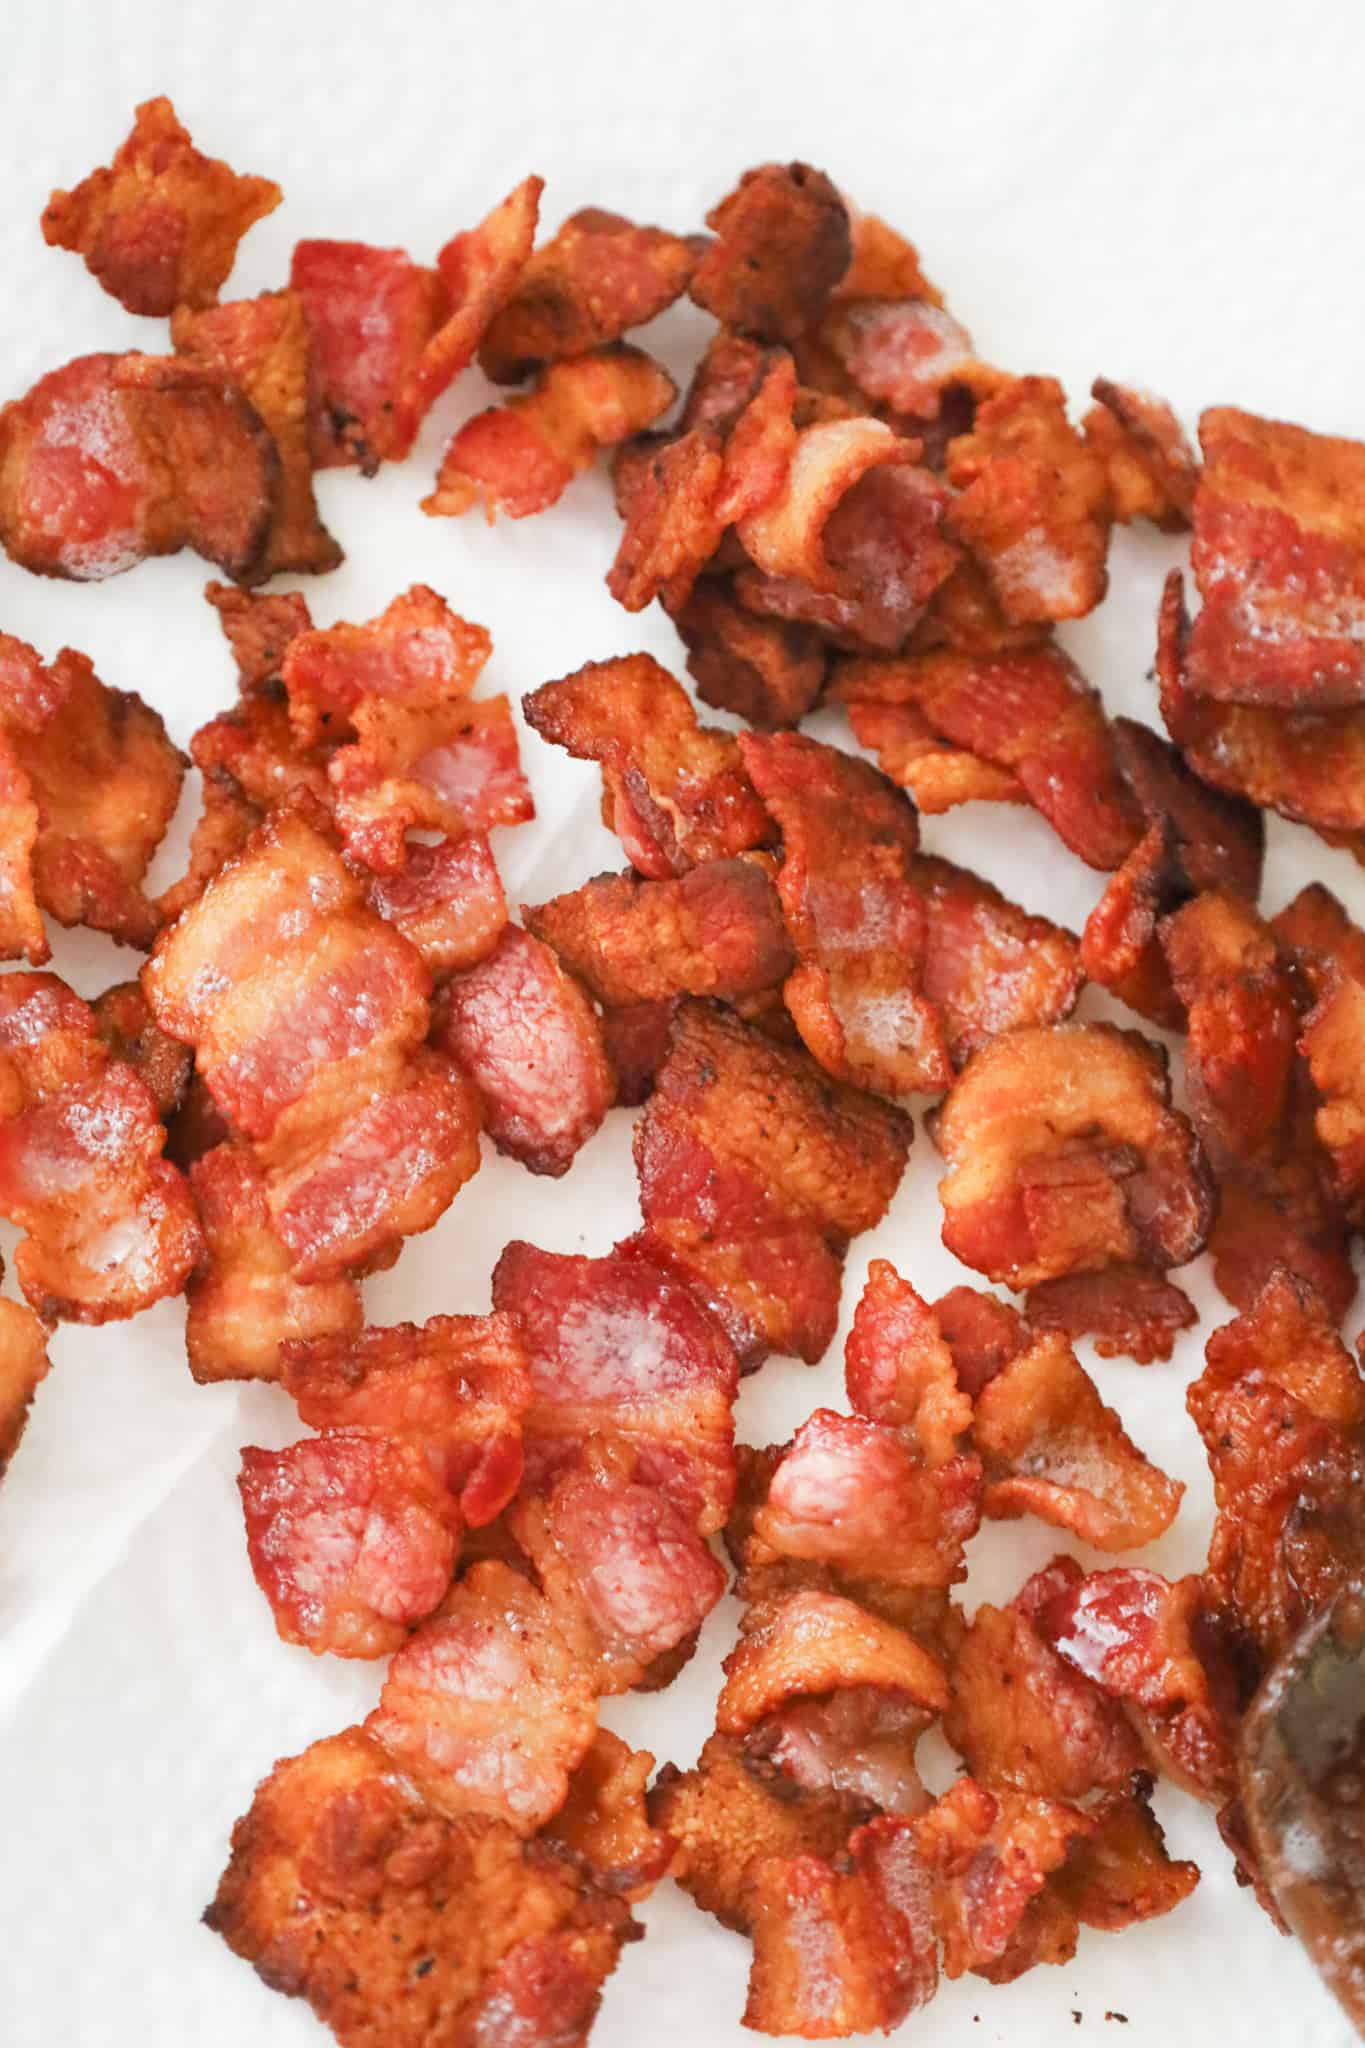 cooked bacon pieces on paper towel